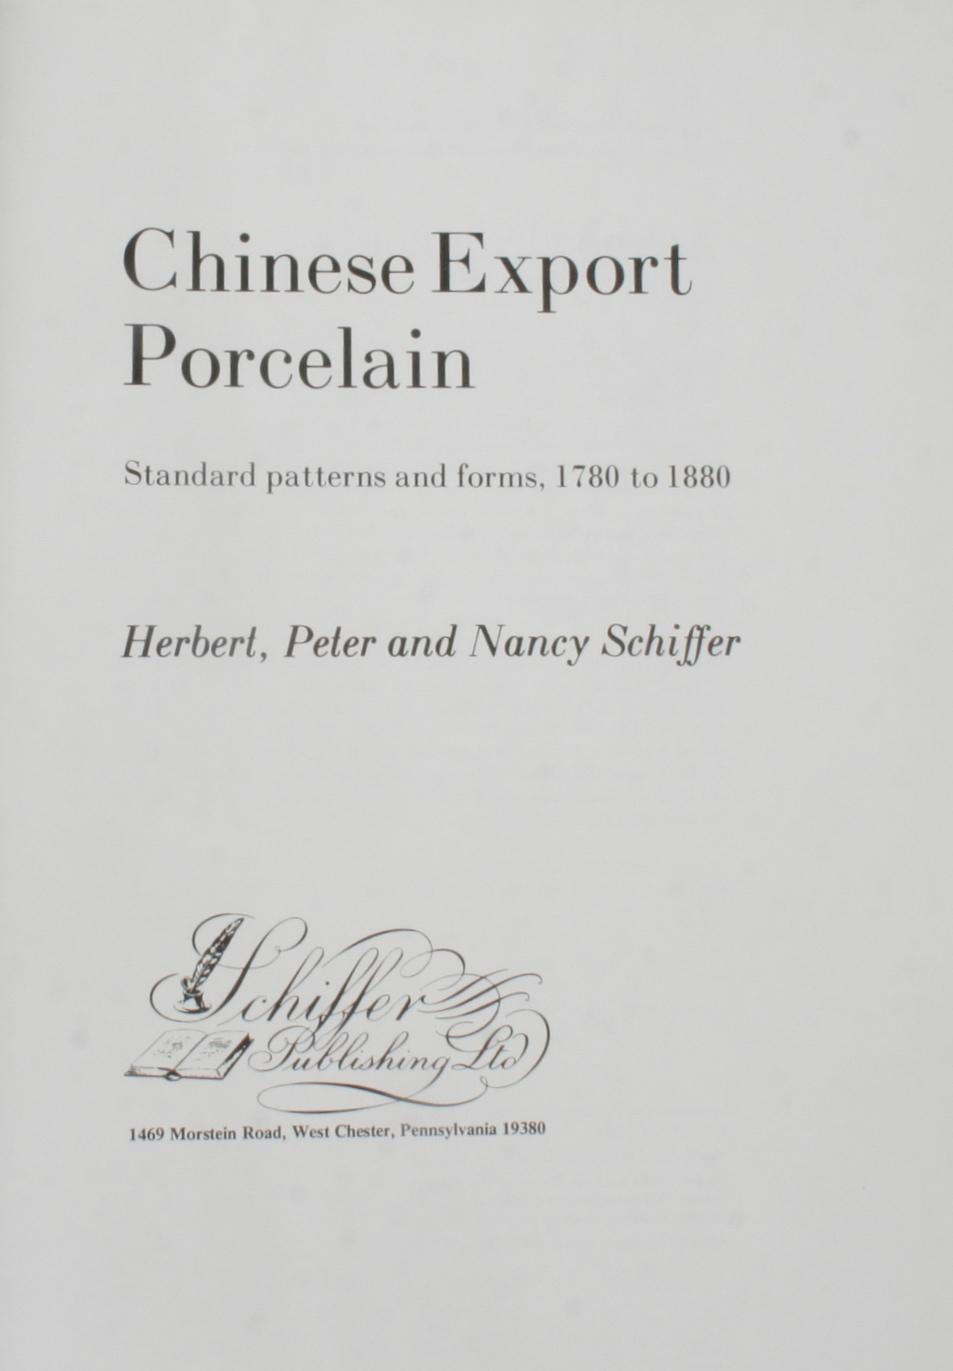 Chinese Export Porcelain, Standard Patterns and Forms, 1780-1880 by Herbert, Peter, and Nancy Schiffer. West Chester: Schiffer Publishing Ltd., 1975. 1st Ed hardcover with dust jacket. 255 pp. Reference book on Chinese porcelain that discusses the